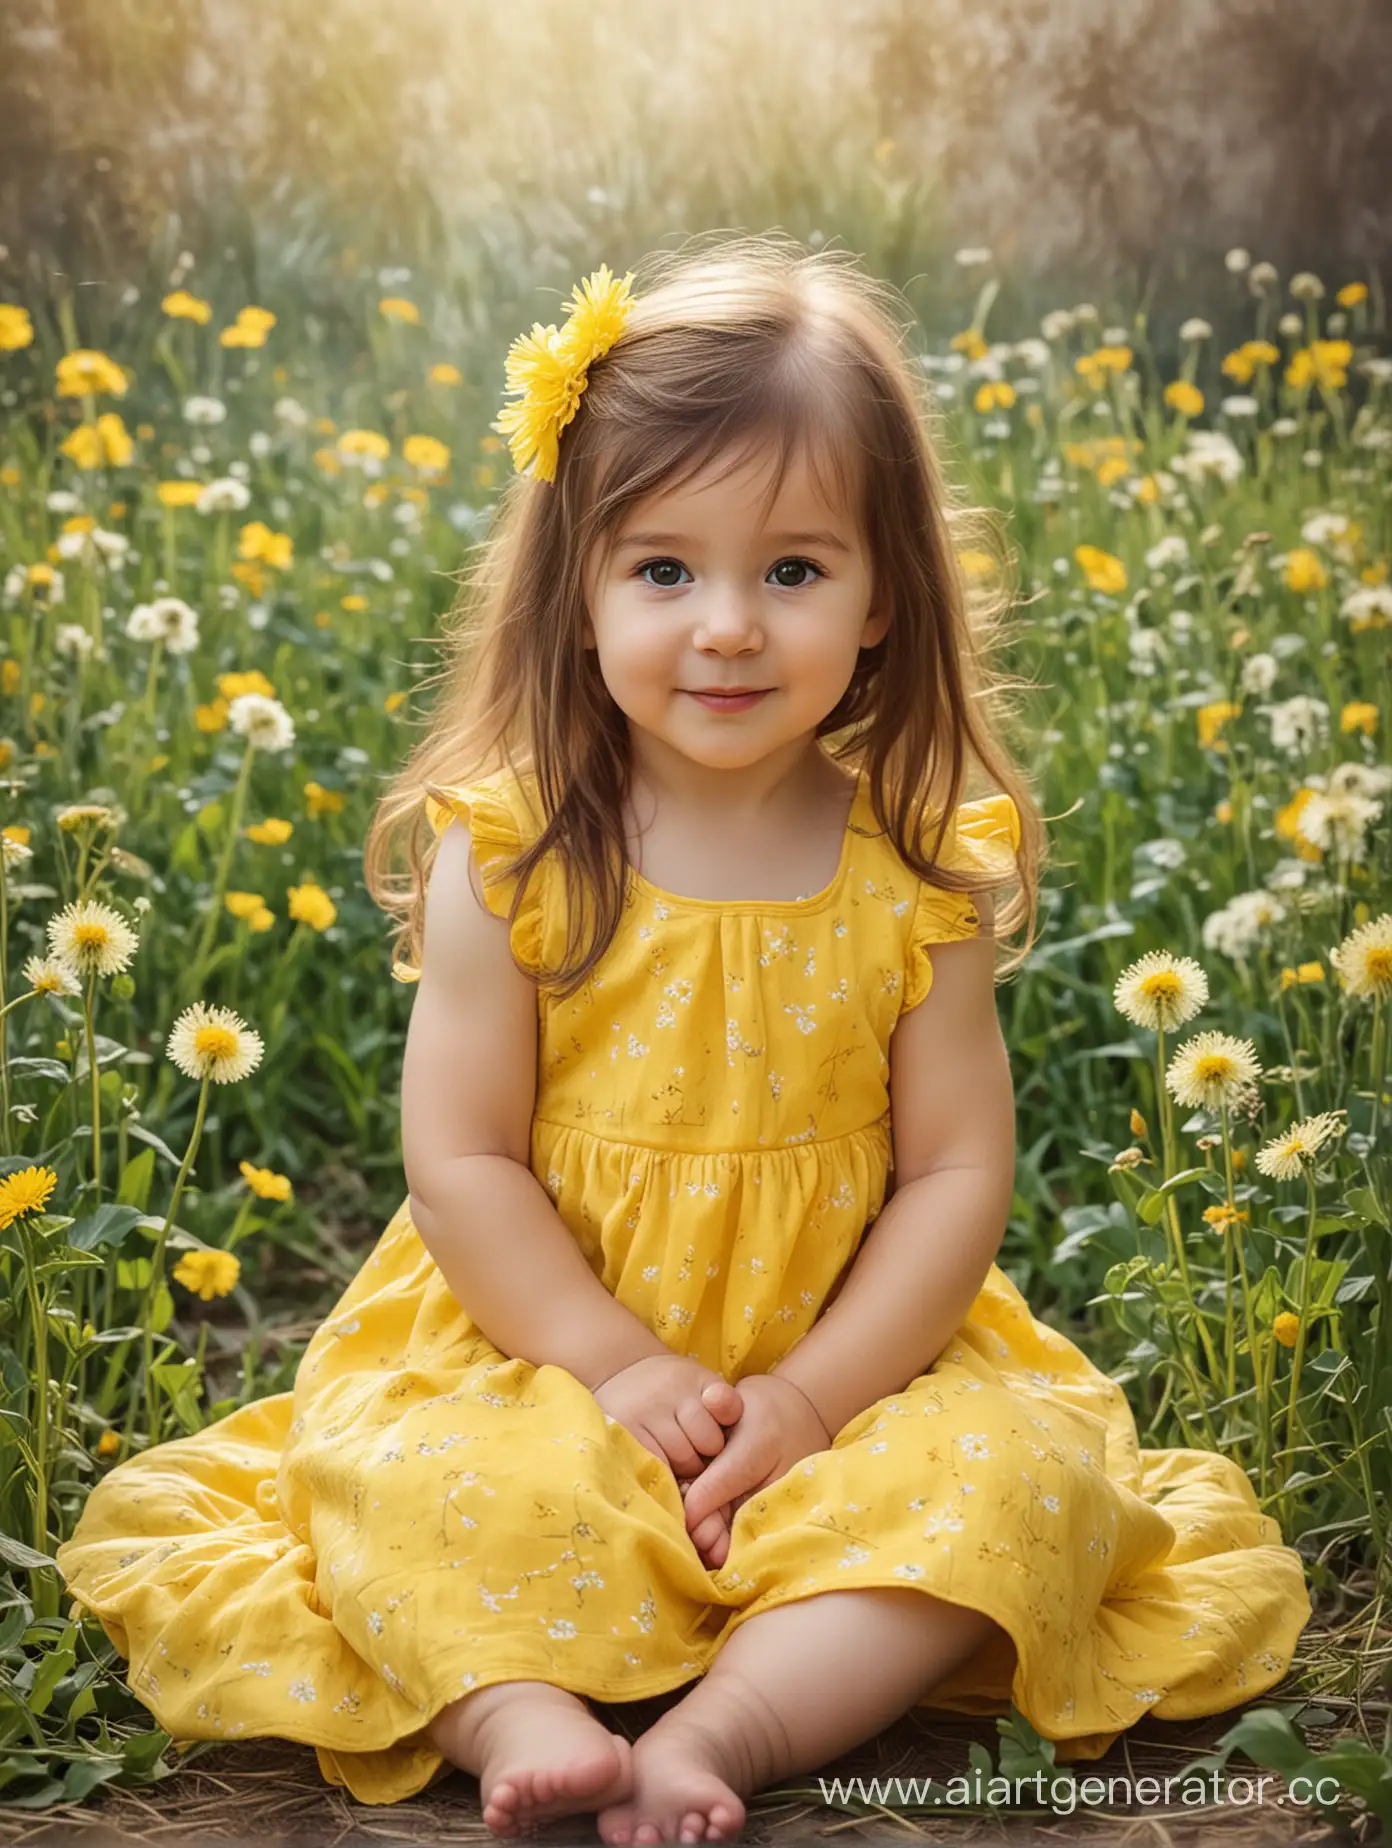 Toddler-with-Long-Brown-Hair-in-Yellow-Fluffy-Dress-Playing-in-Dandelions